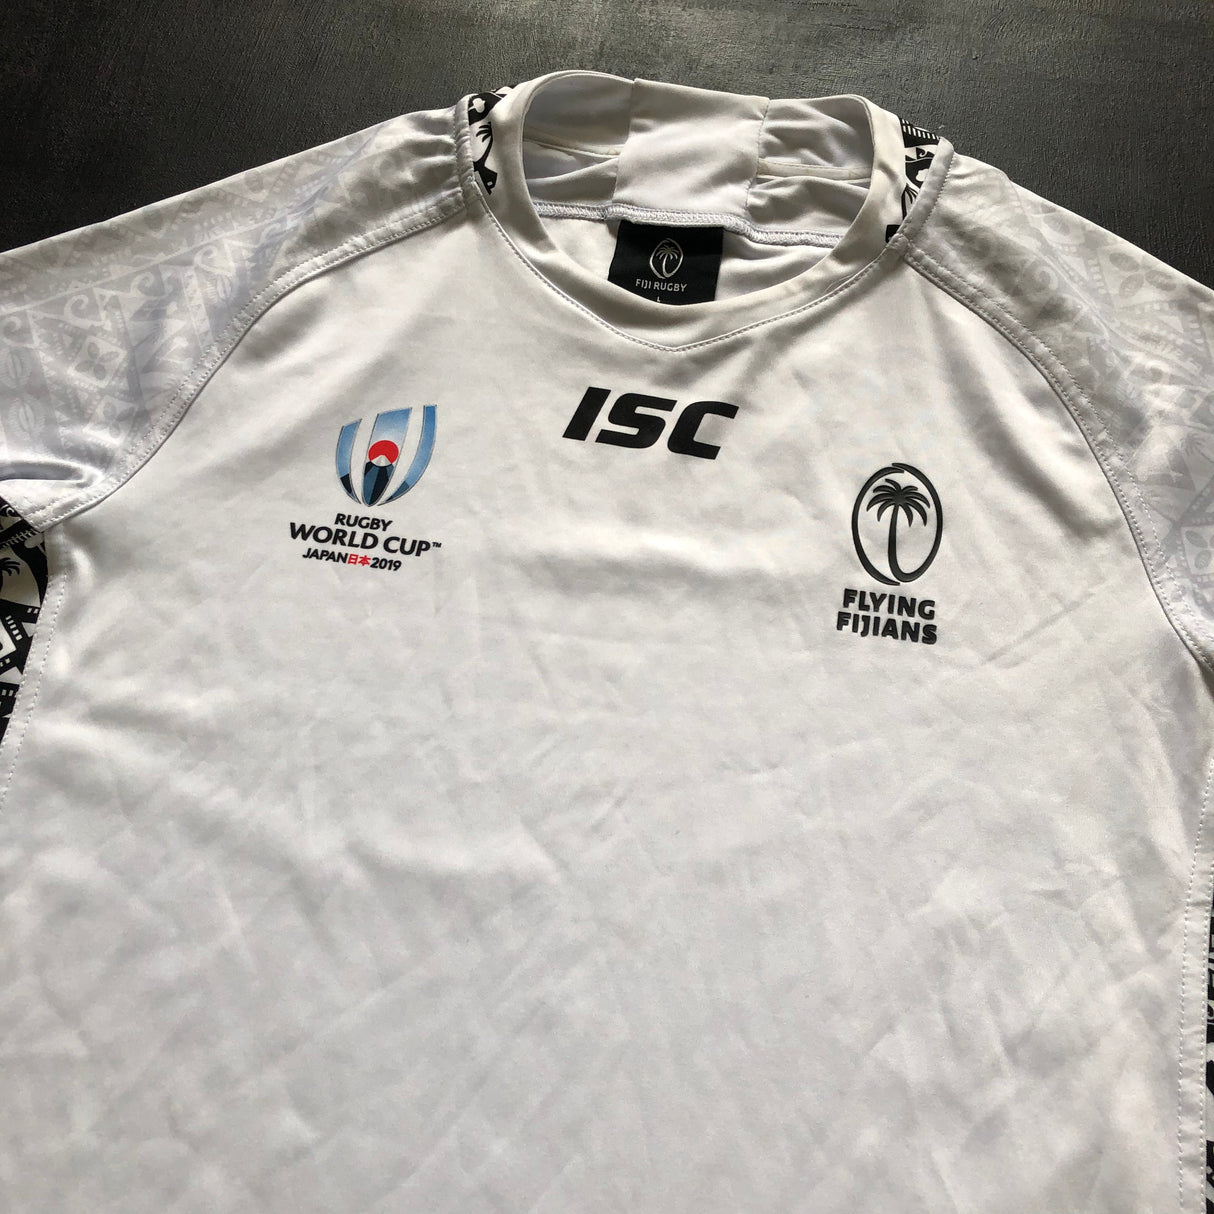 Fiji National Rugby Team Jersey 2019 Rugby World Cup Large Underdog Rugby - The Tier 2 Rugby Shop 